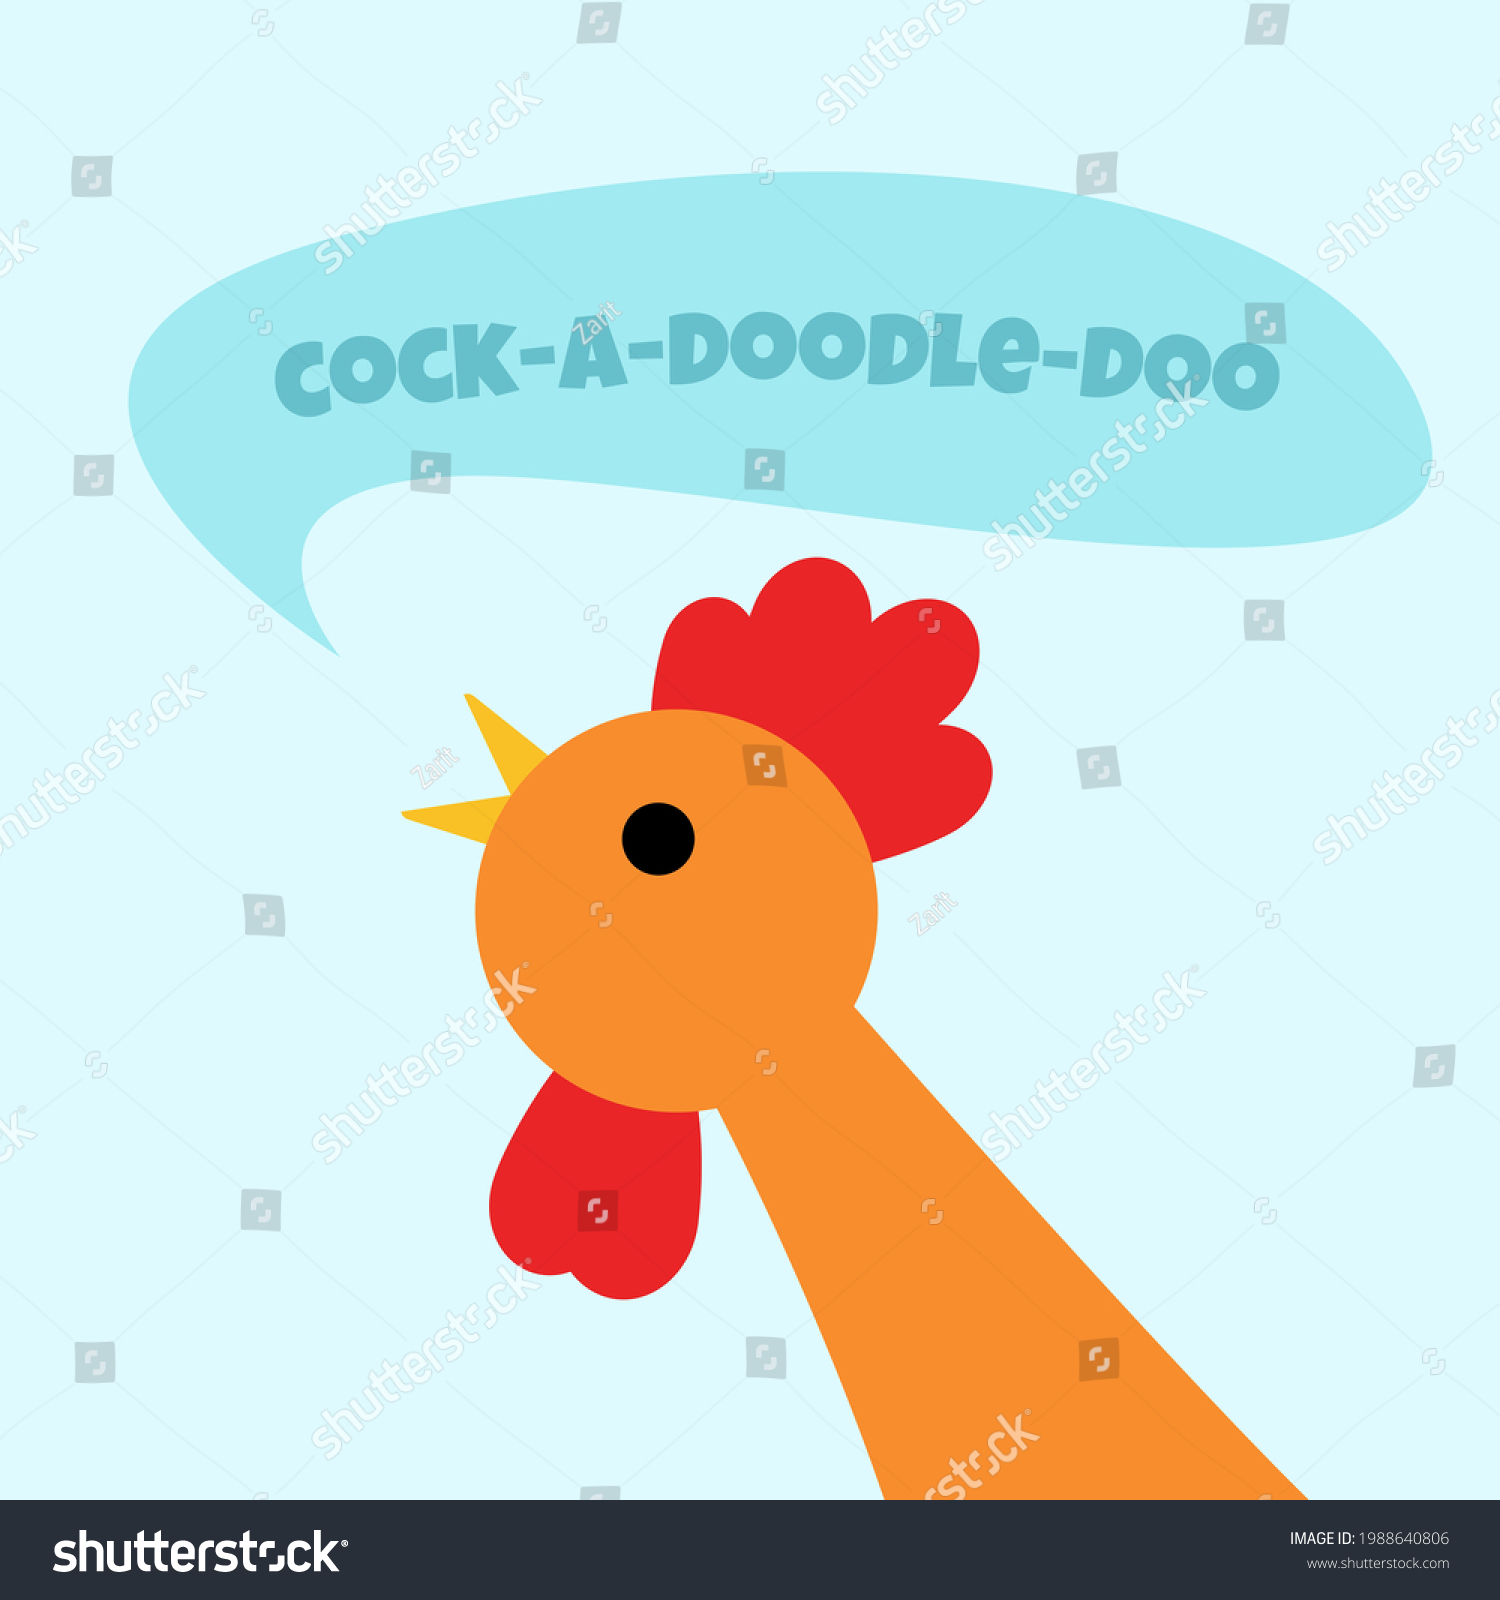 SVG of Cock head and speech bubble. Cock-a-doodle-doo text. Close-up portrait of a singing rooster in flat cartoon style. Vector illustration svg